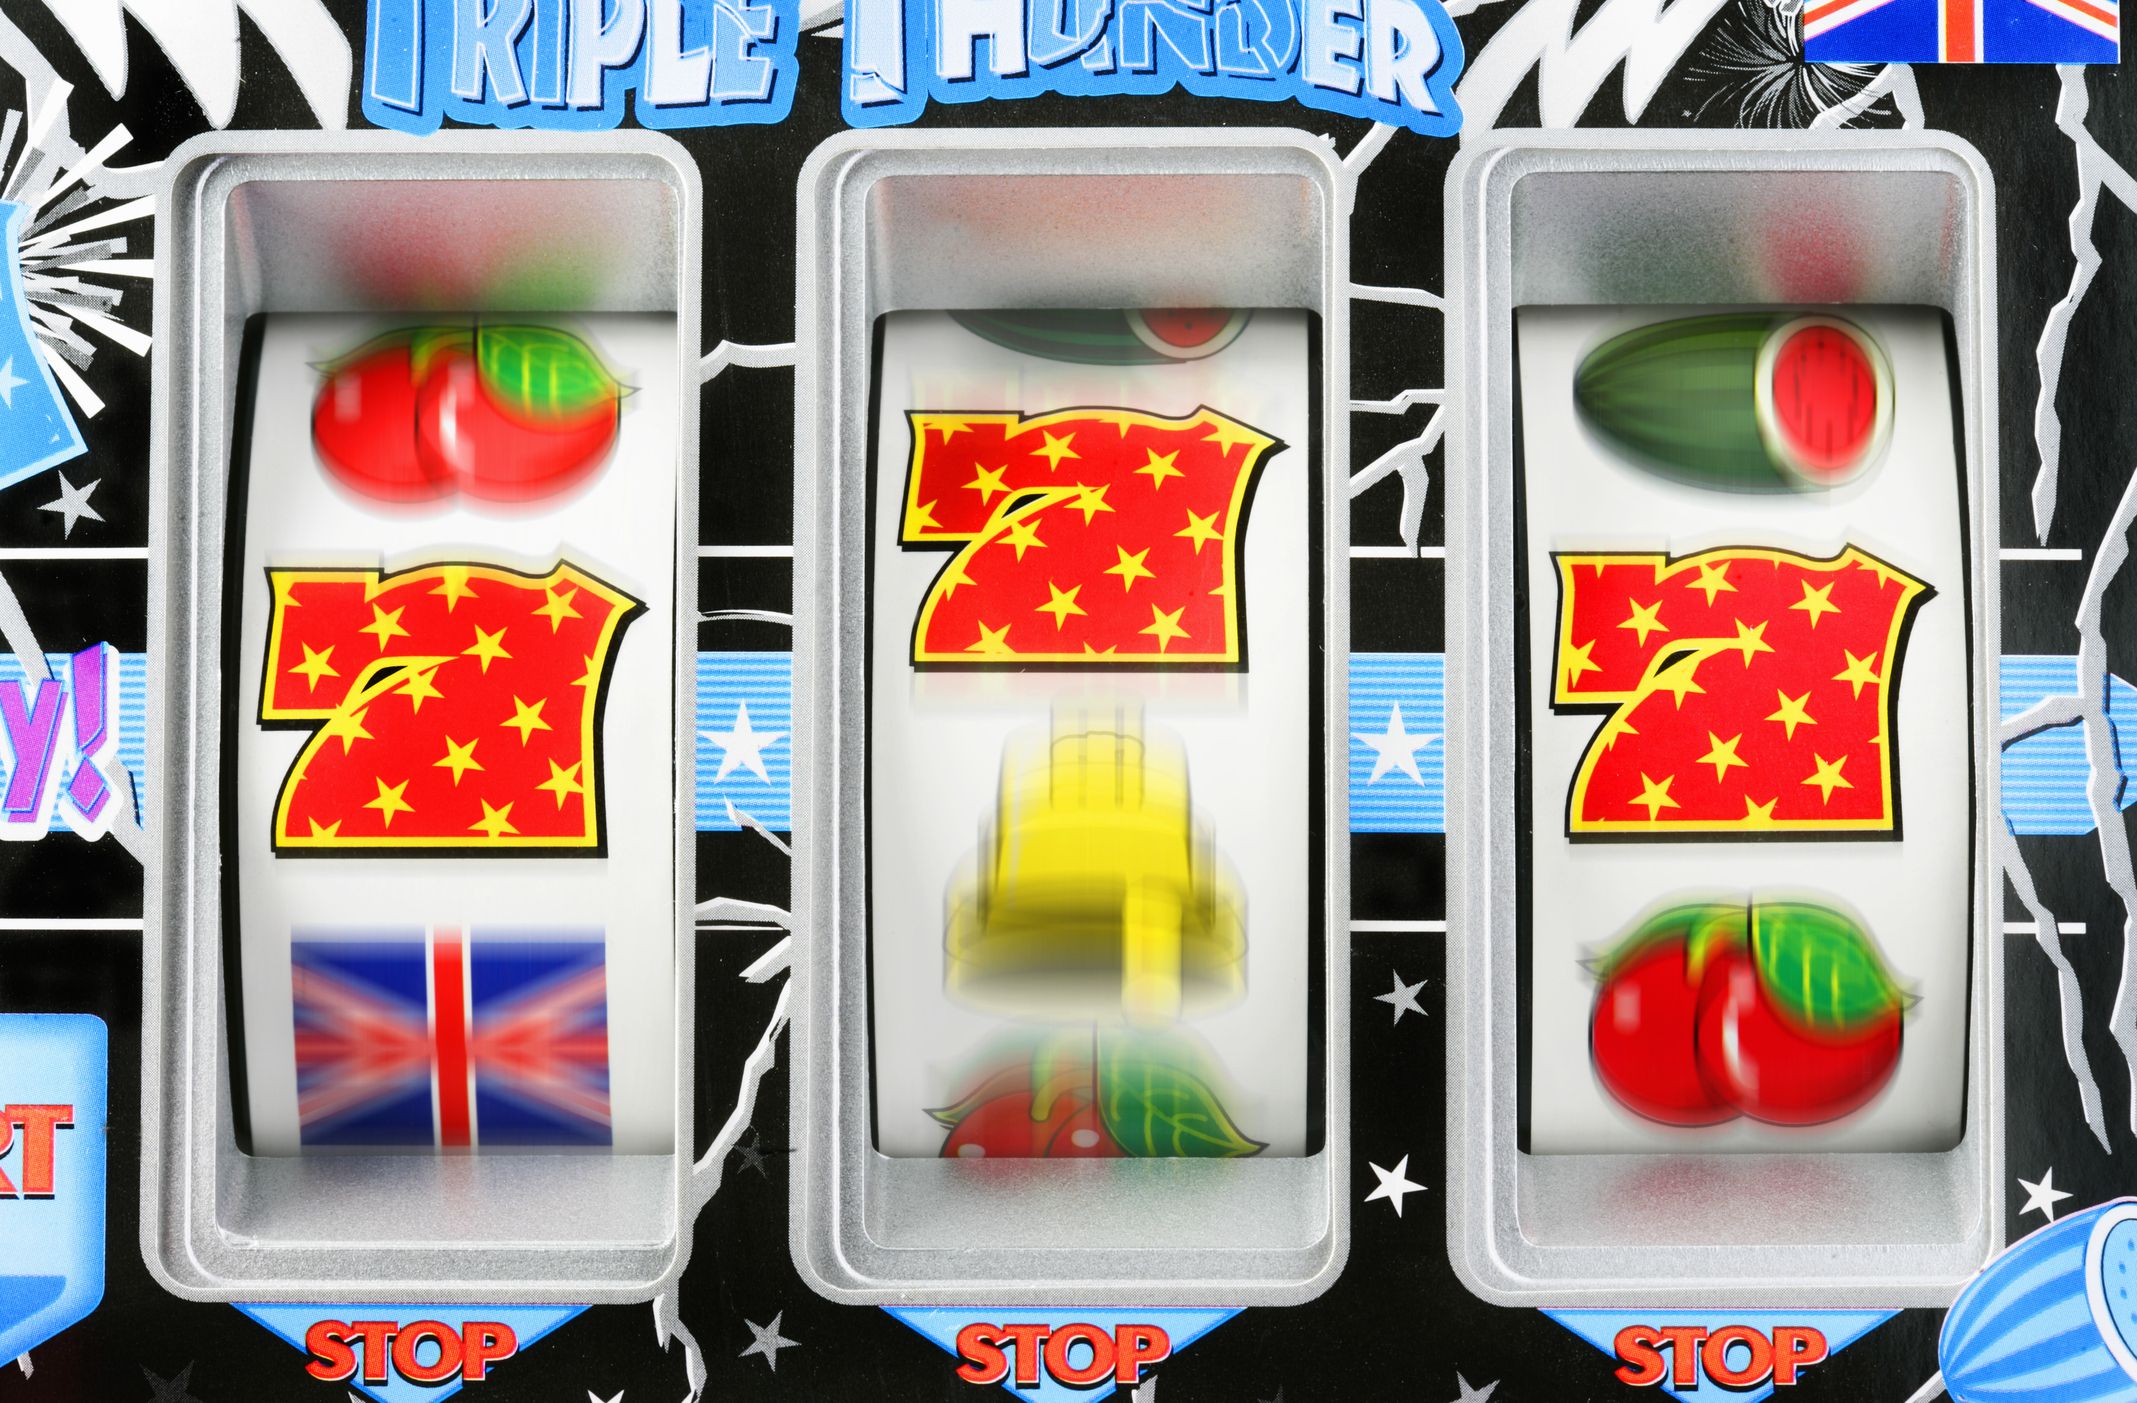 How To Read The Bingo Patterns On Slot Machines